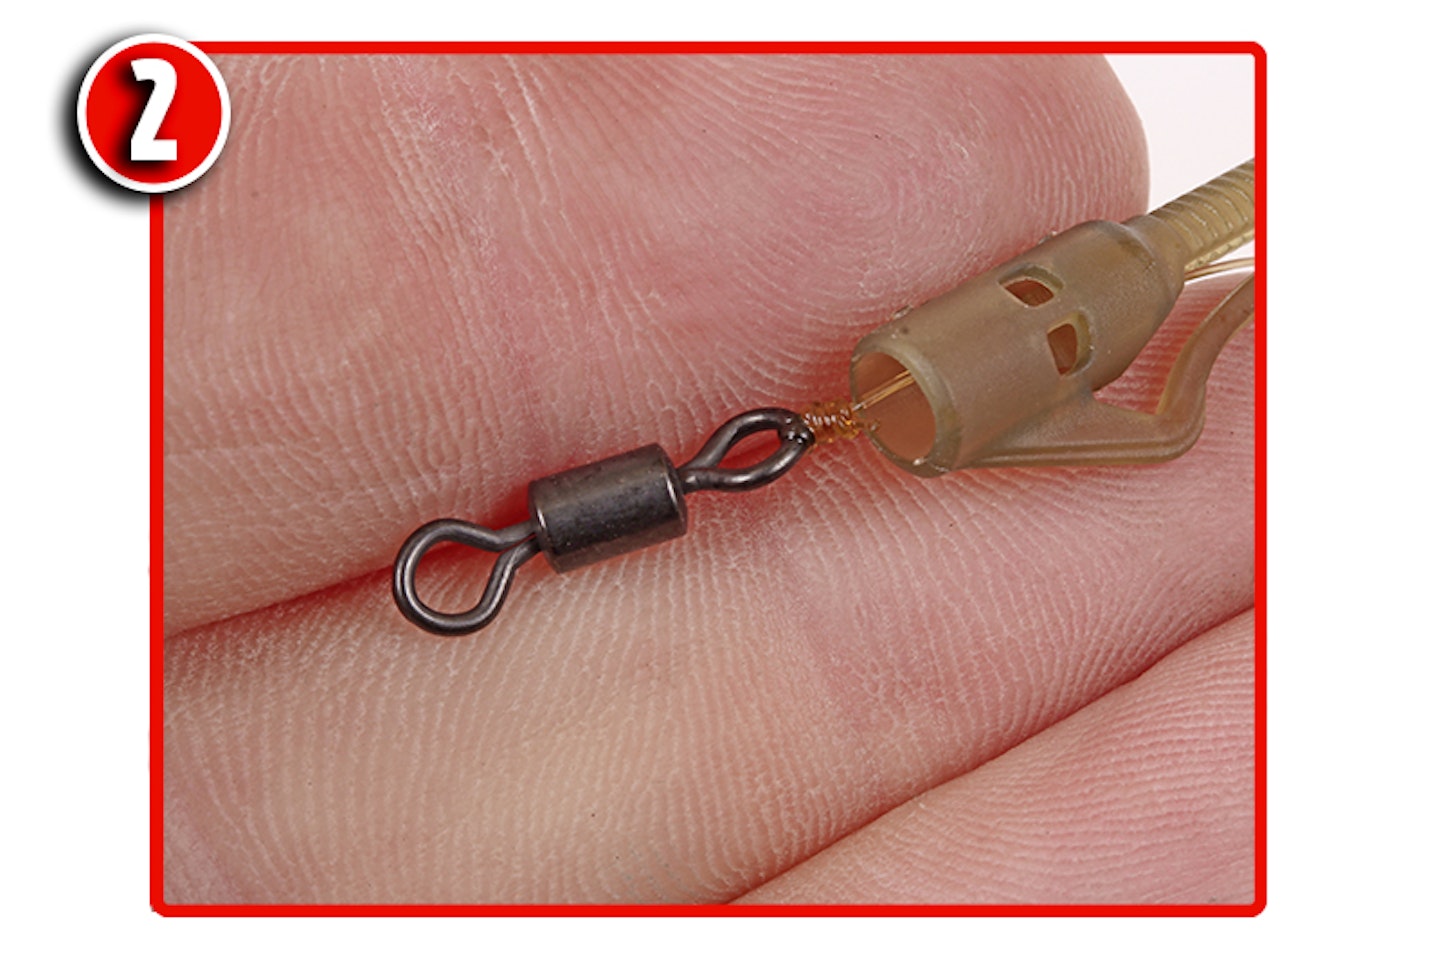 Tie a rig swivel to the end of the mainline using a four-turn grinner knot or palomar knot 